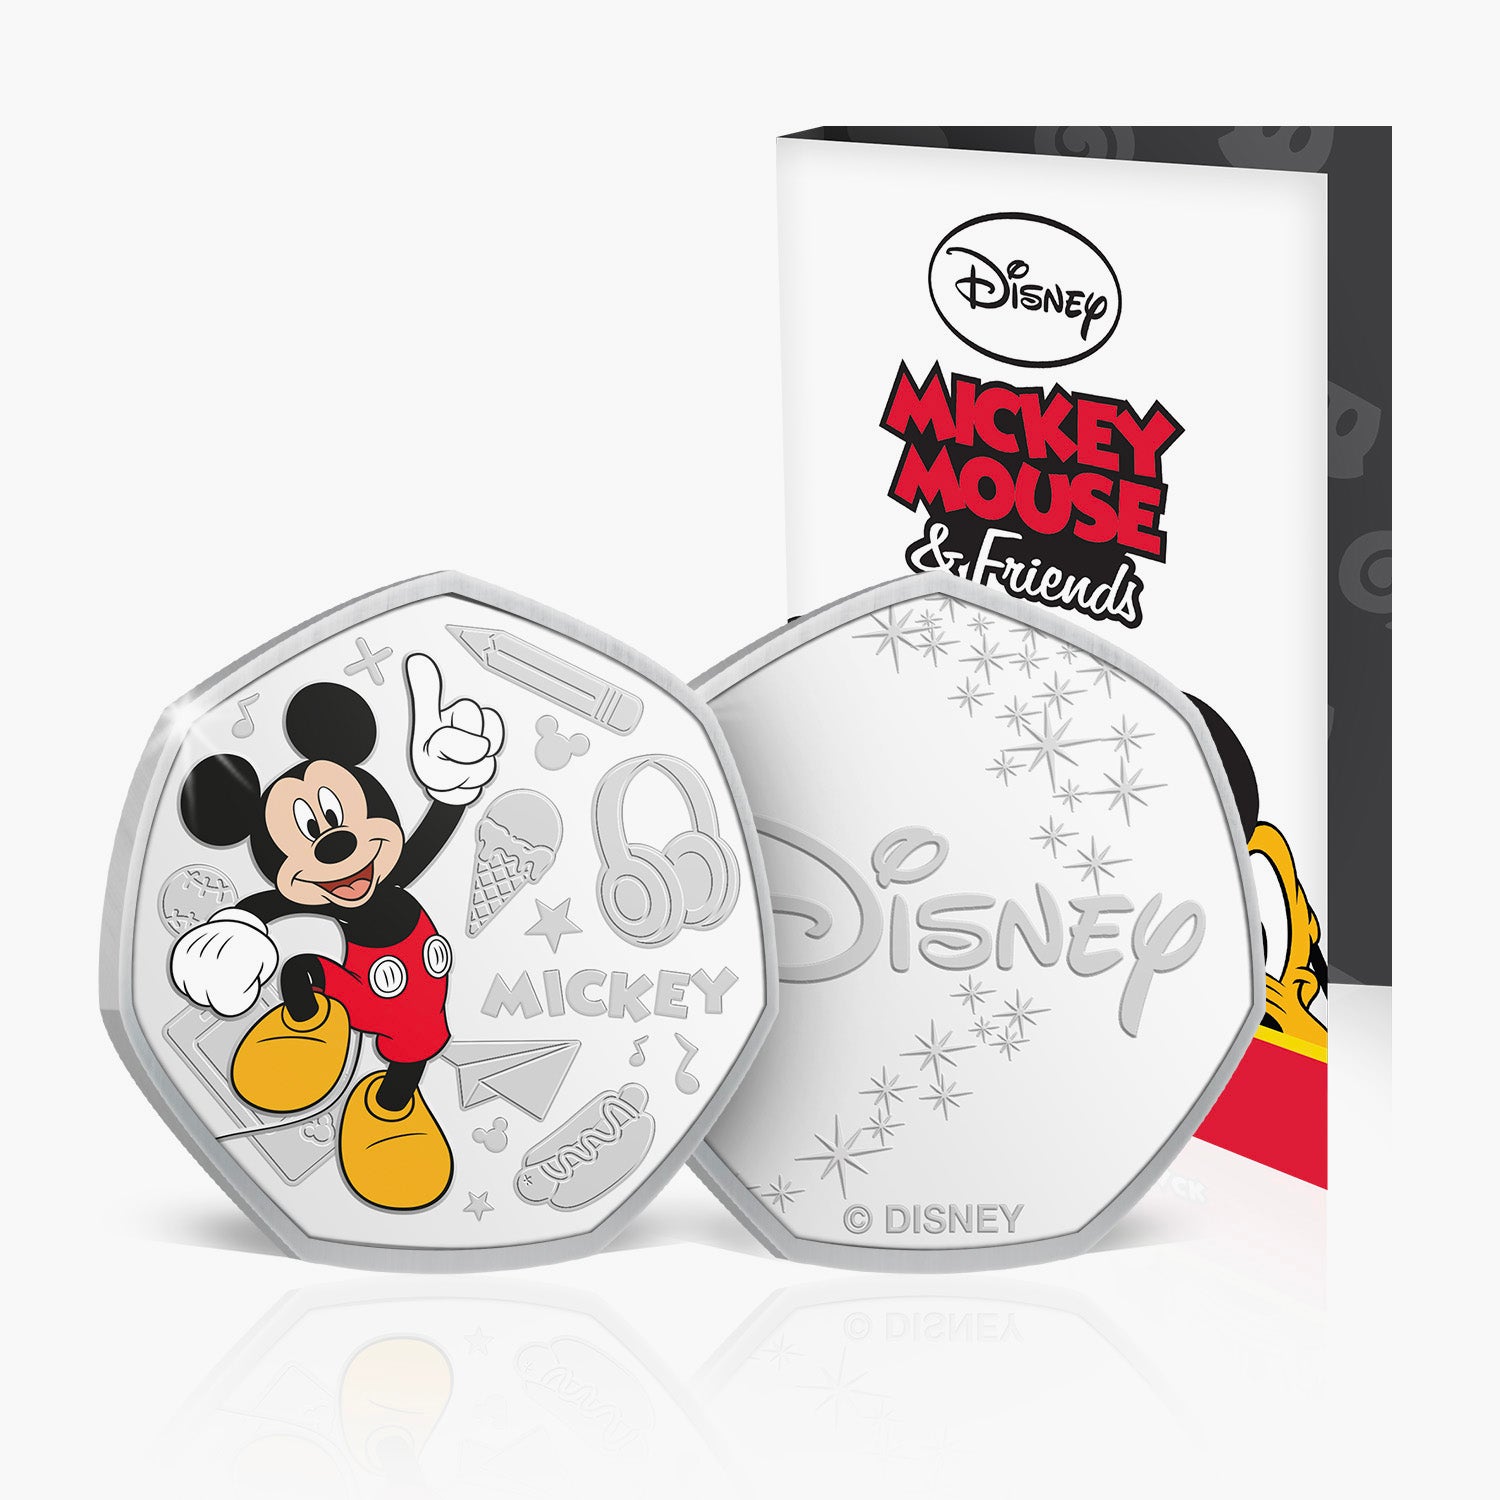 The Disney Mickey Mouse and Friends Collection